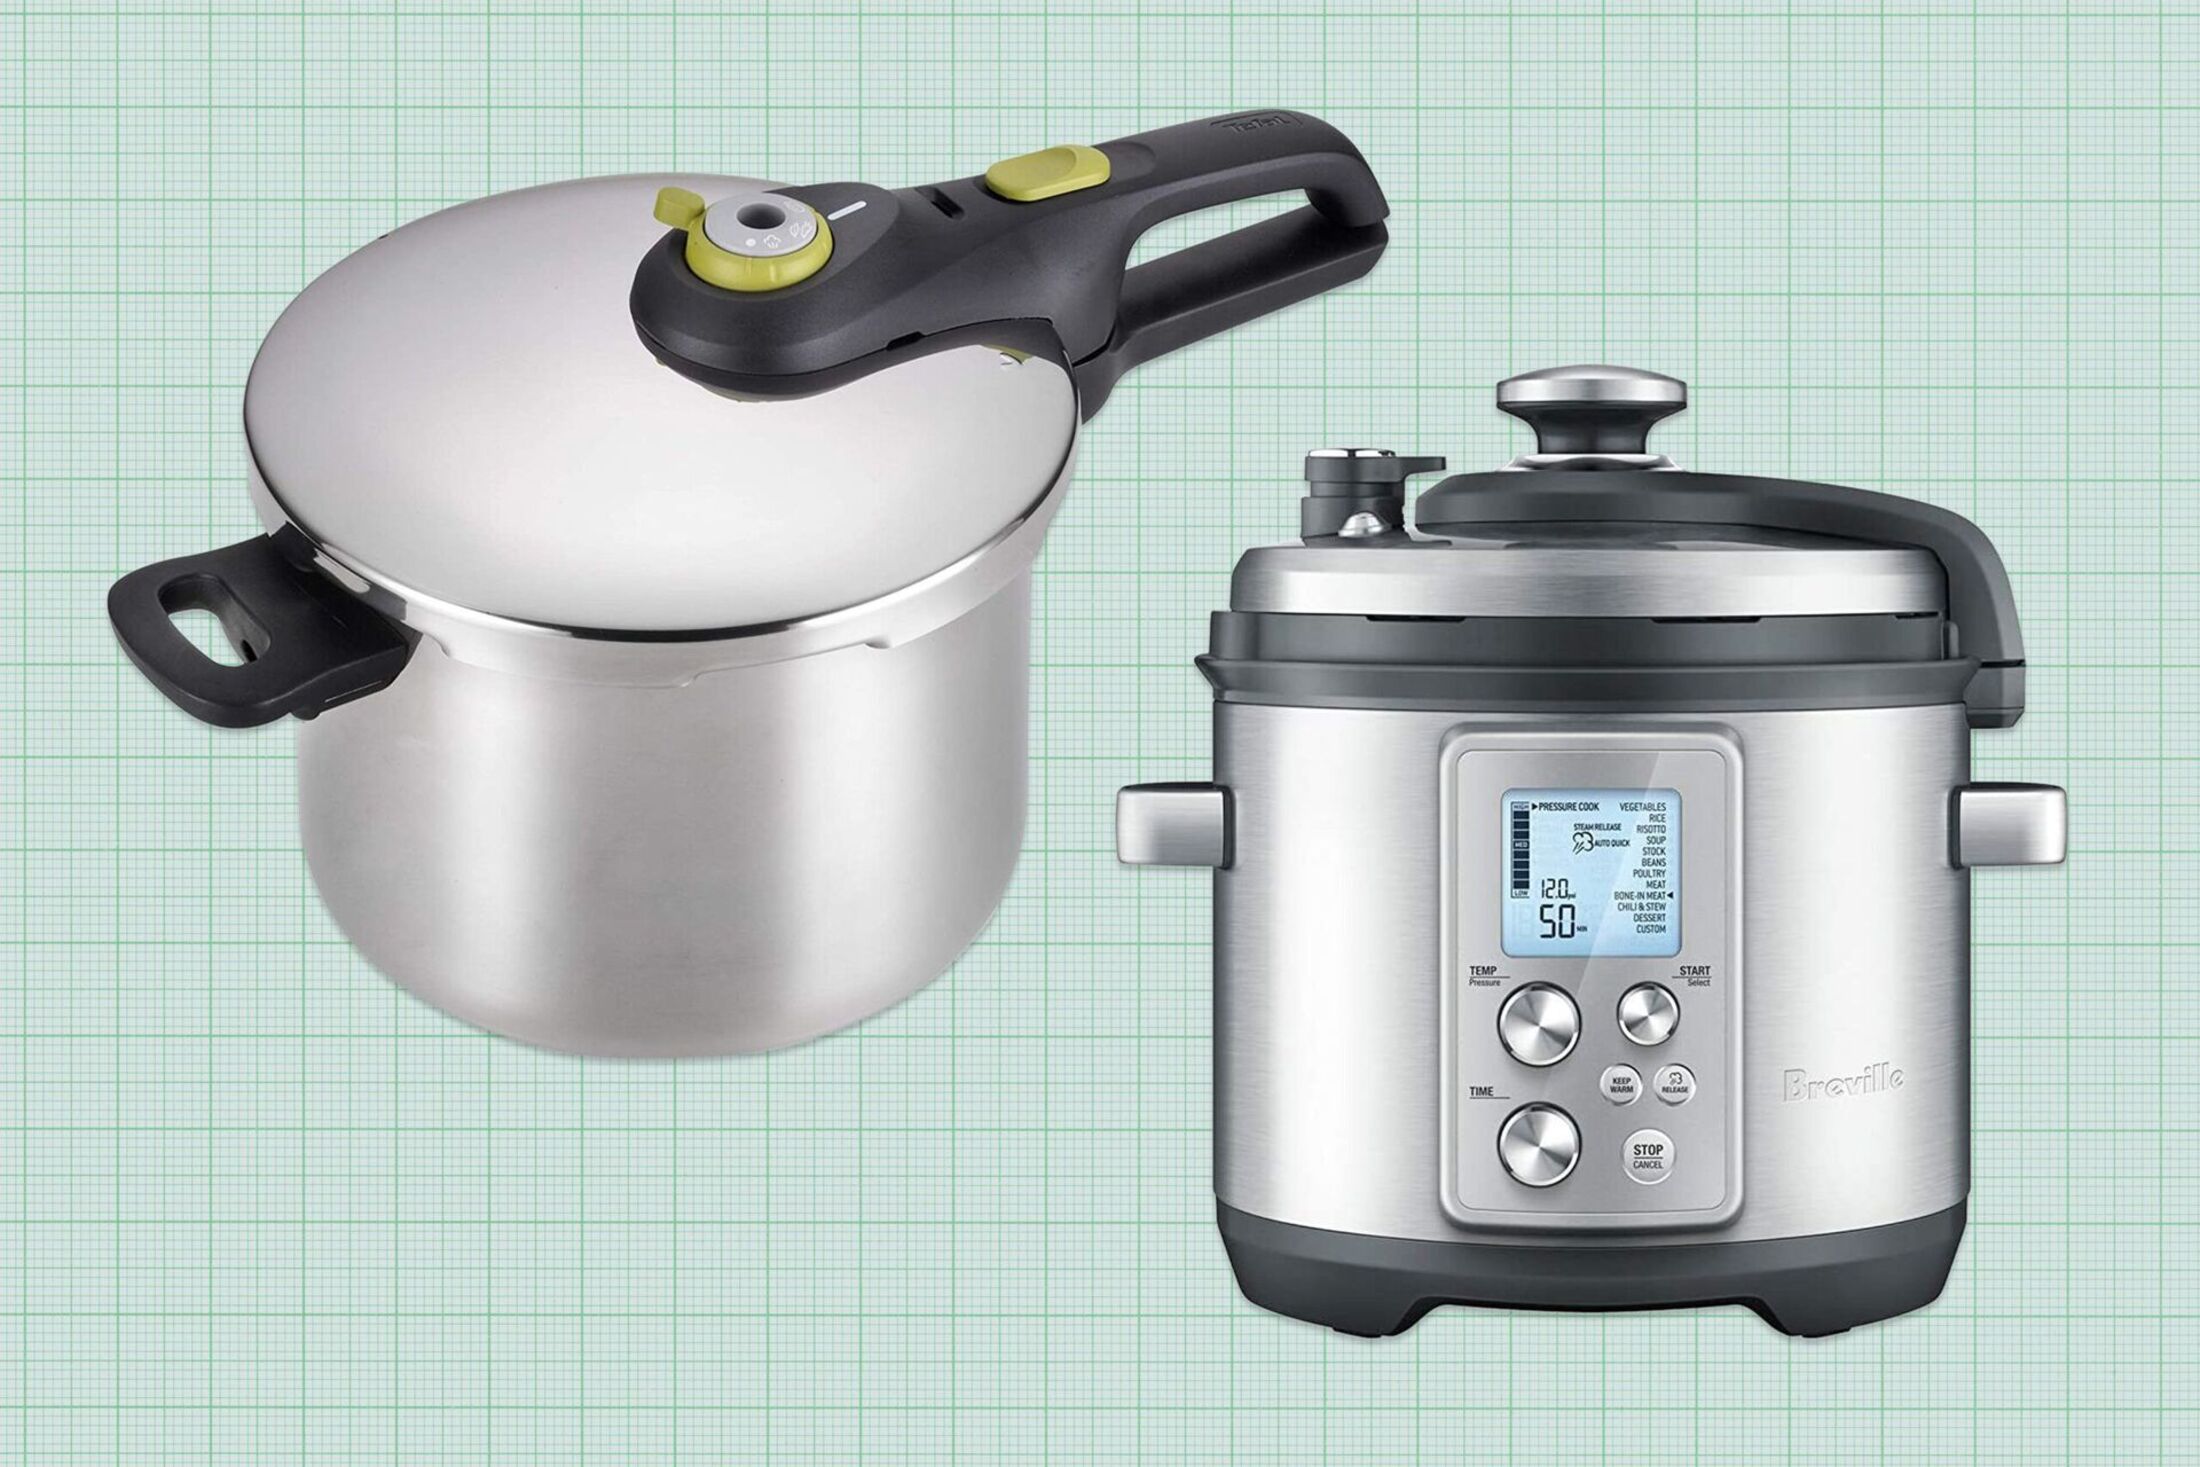 How Much Time Is Needed To Add For Electric Pressure Cooker Vs Stovetop Pressure Cooker